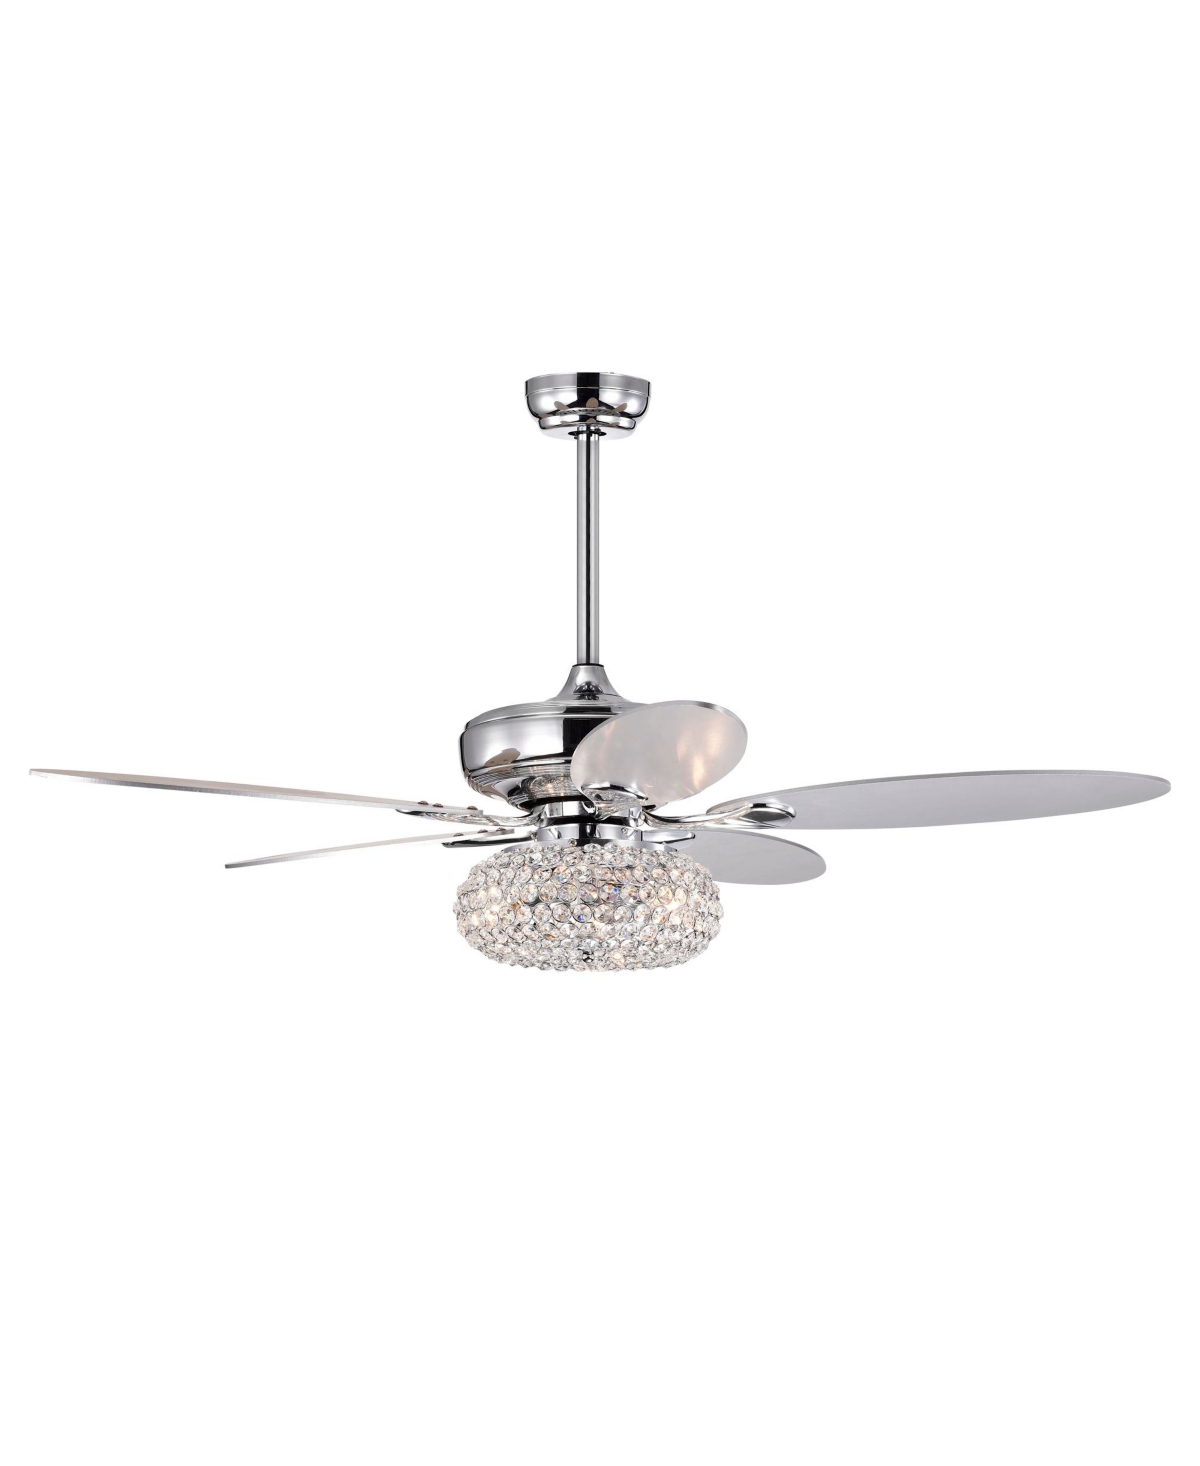 Home Accessories Shelby 52" 3-light Indoor Ceiling Fan With Light Kit In Chrome